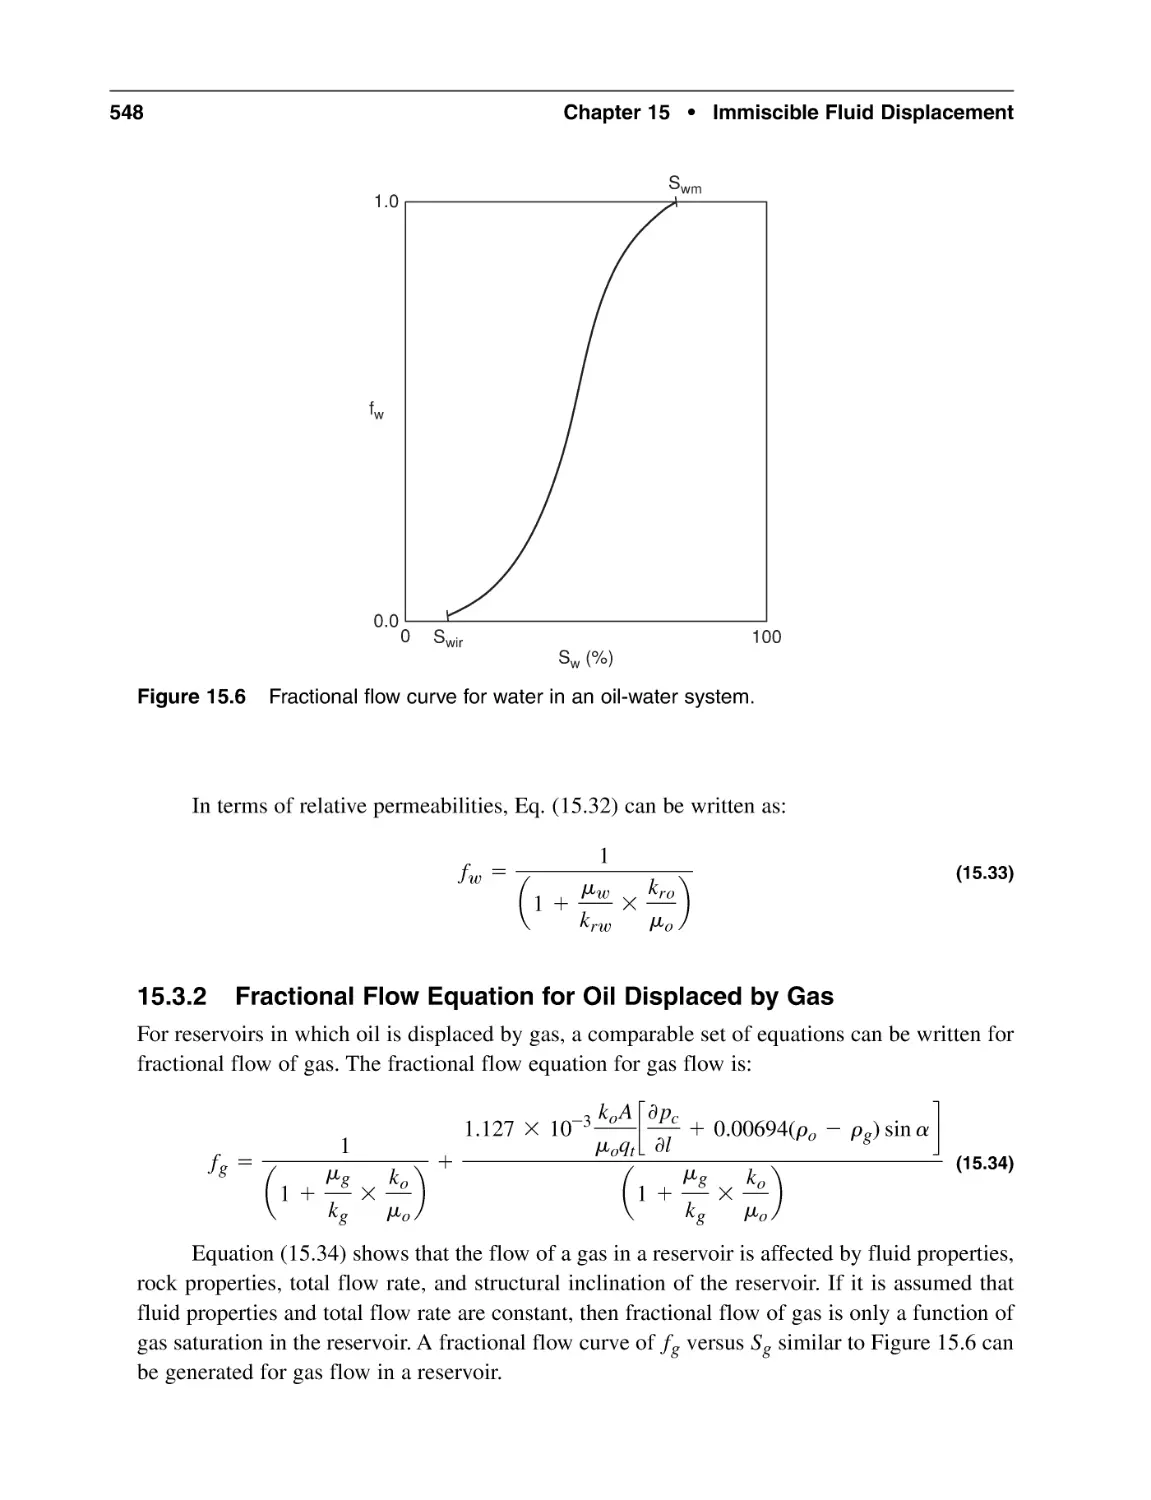 15.3.2 Fractional Flow Equation for Oil Displaced by Gas